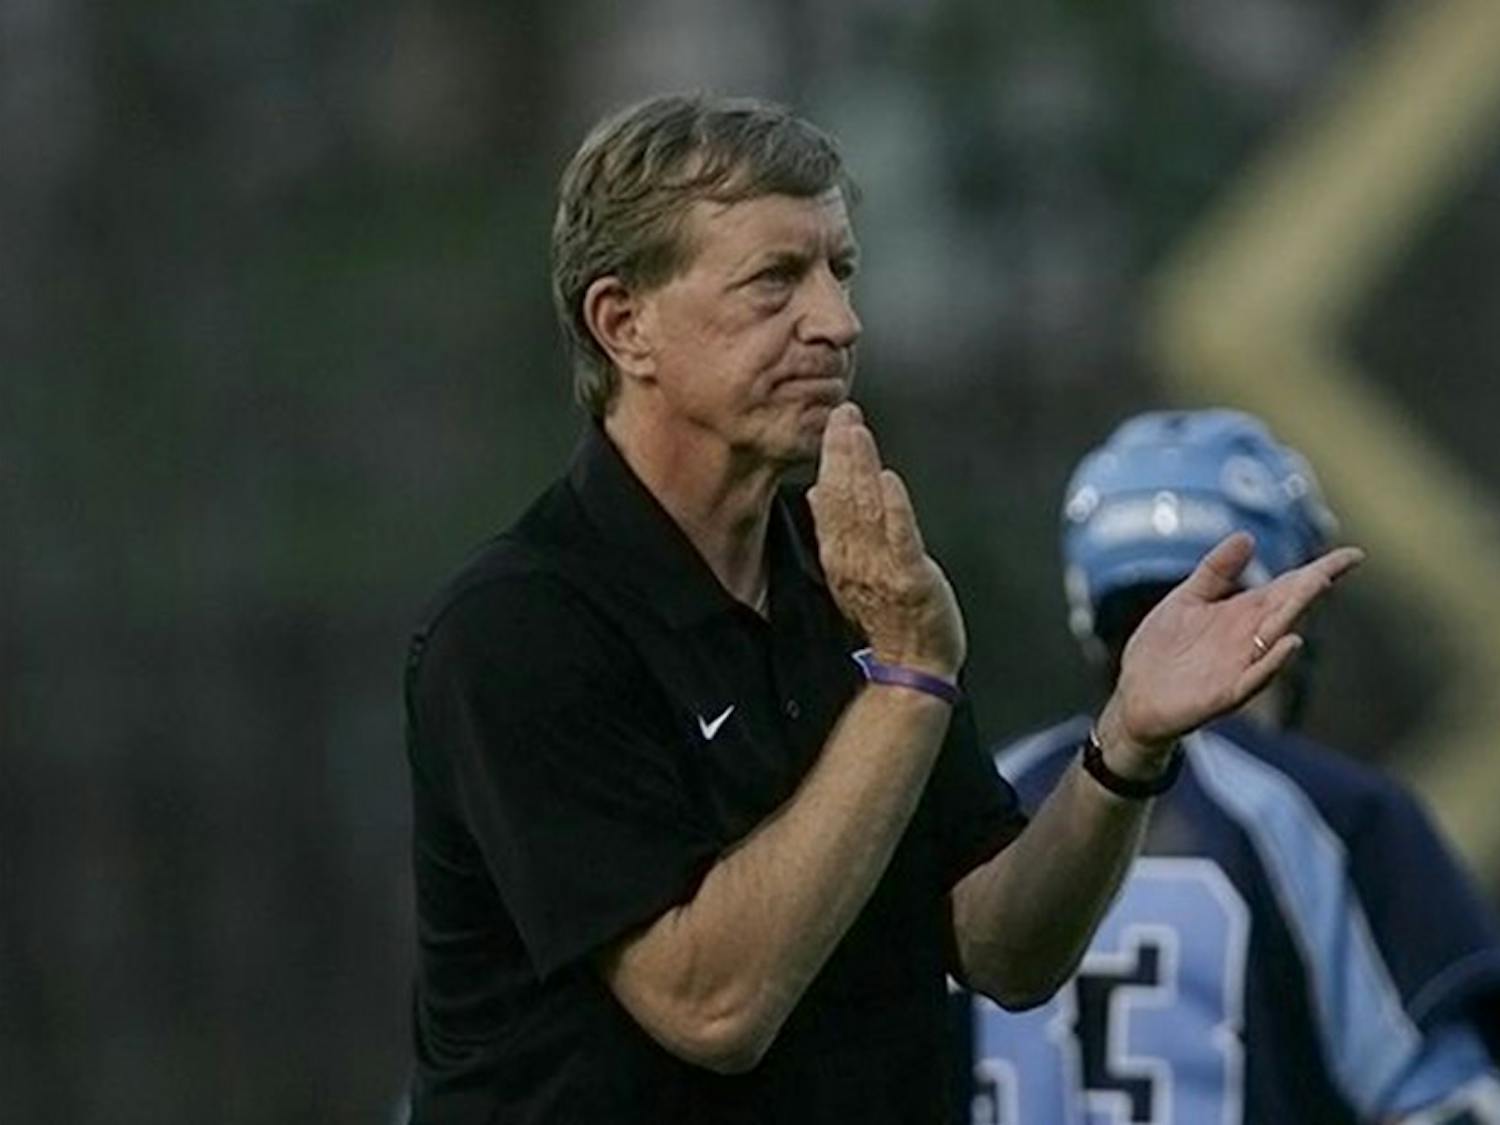 John Danowski, the winningest coach in Division I history, entered the National Lacrosse Hall of Fame Thursday.